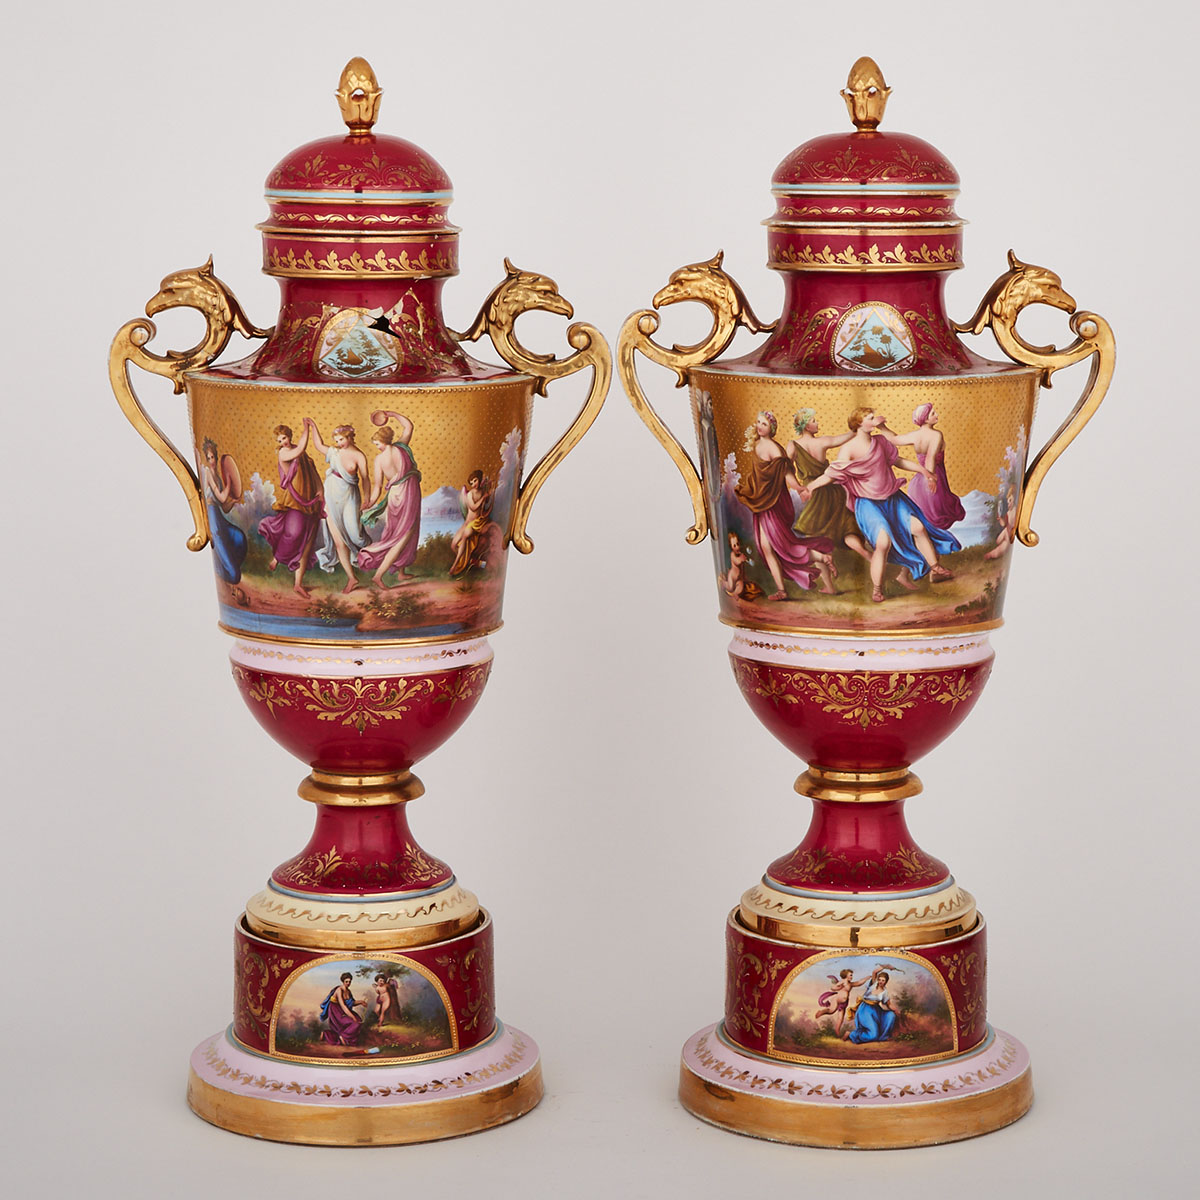 Pair of ‘Vienna’ Large Two Handled Covered Vases and Stands, late 19th century